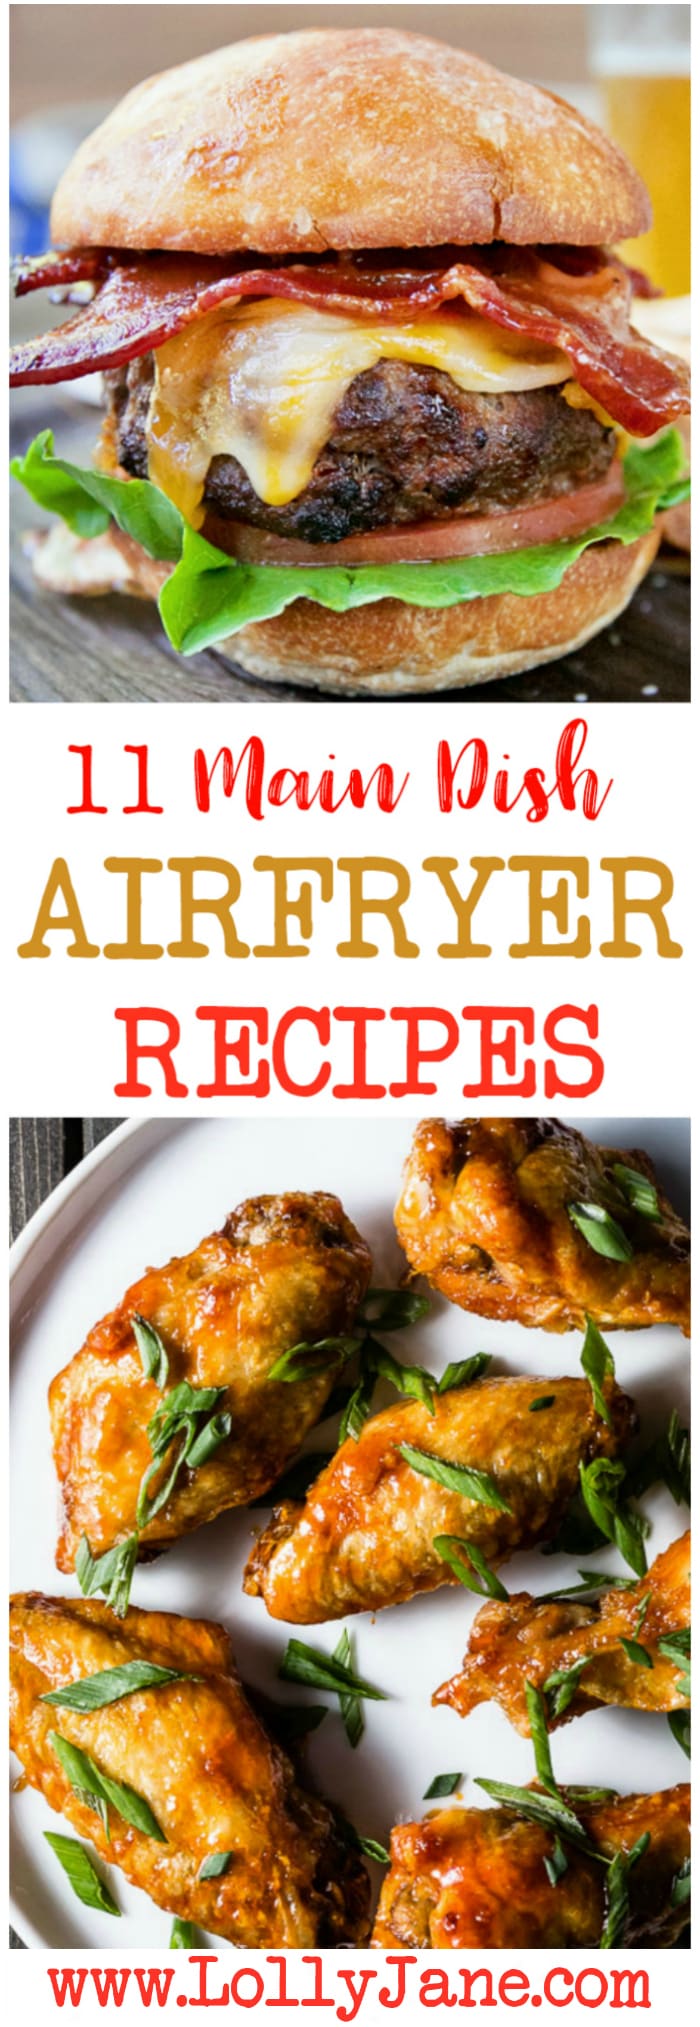 11 Airfryer main dish recipes -  Love these yummy air fryer dinner recipes! So many yummy things you can make in your airfryer!